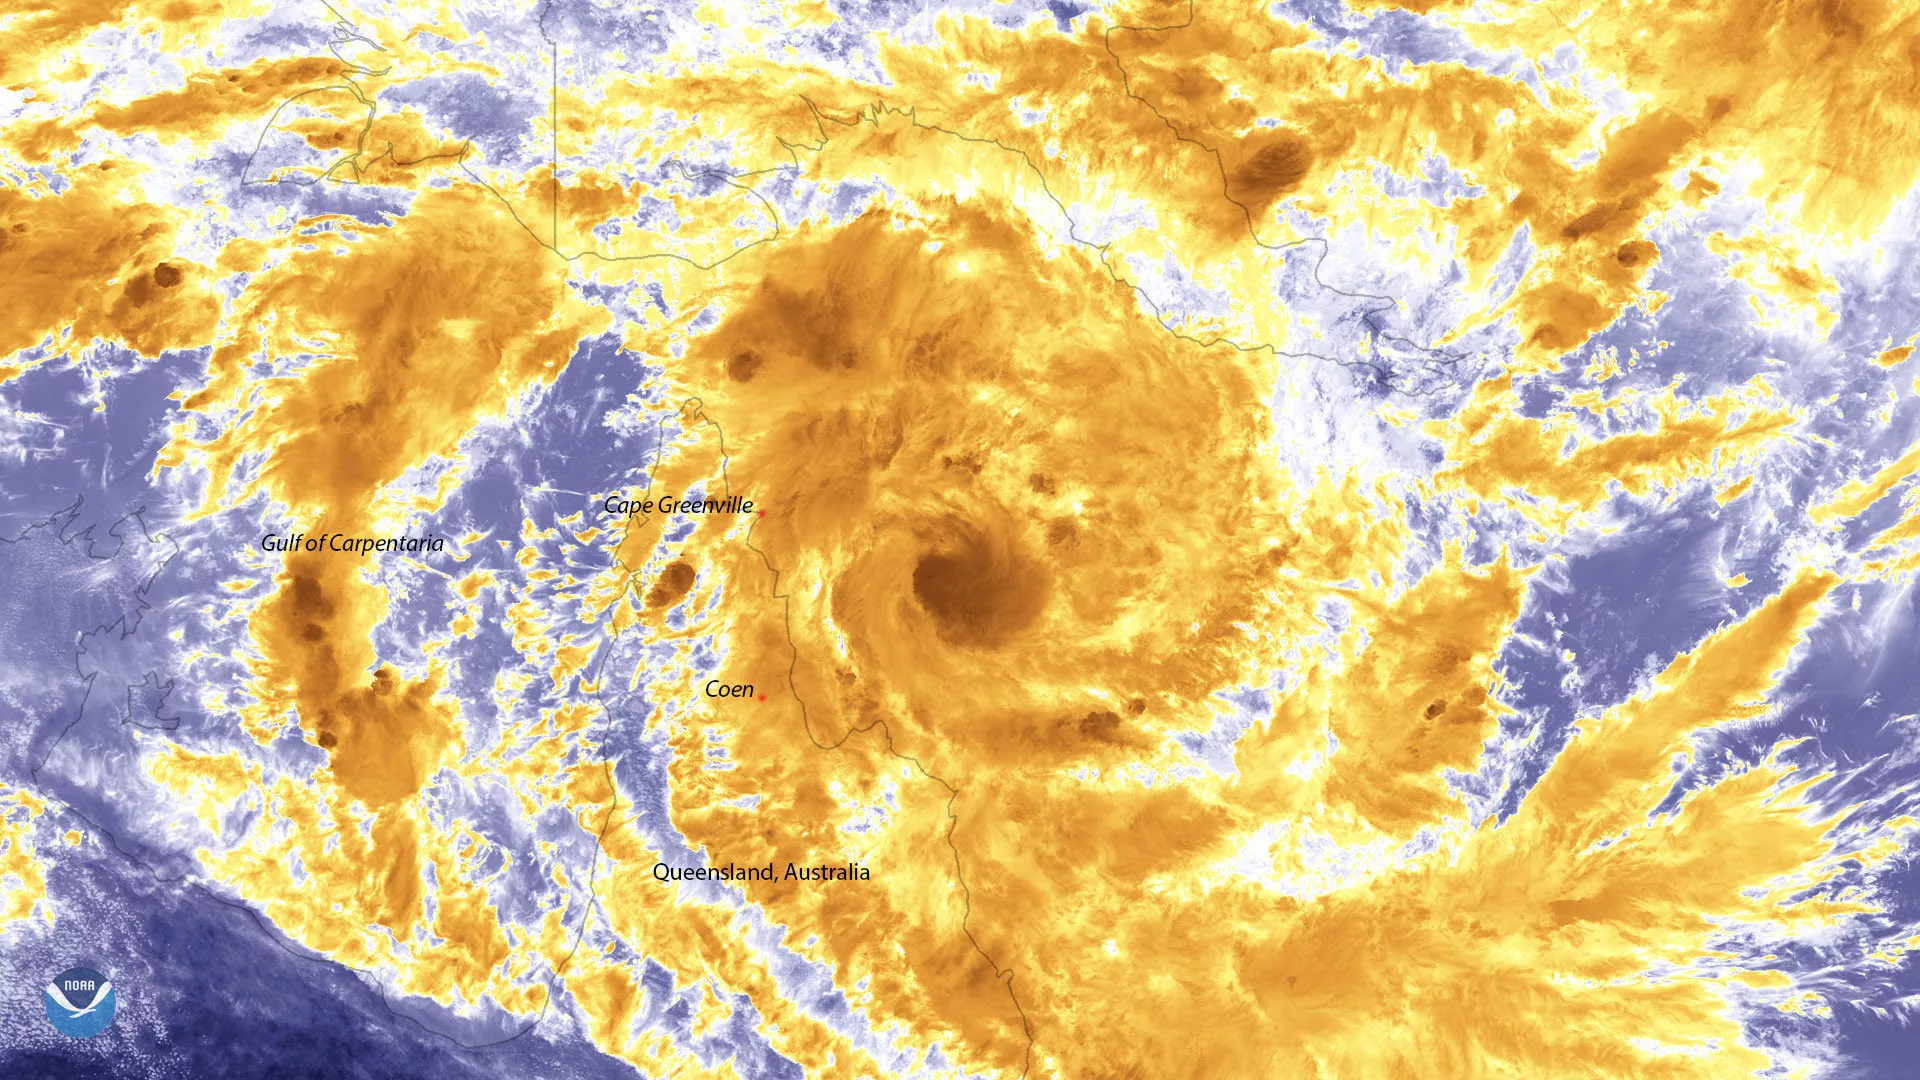 Water vapor imagery of Tropical Cyclone Trevor, seen here by the Suomi NPP satellite on March 18, 2019